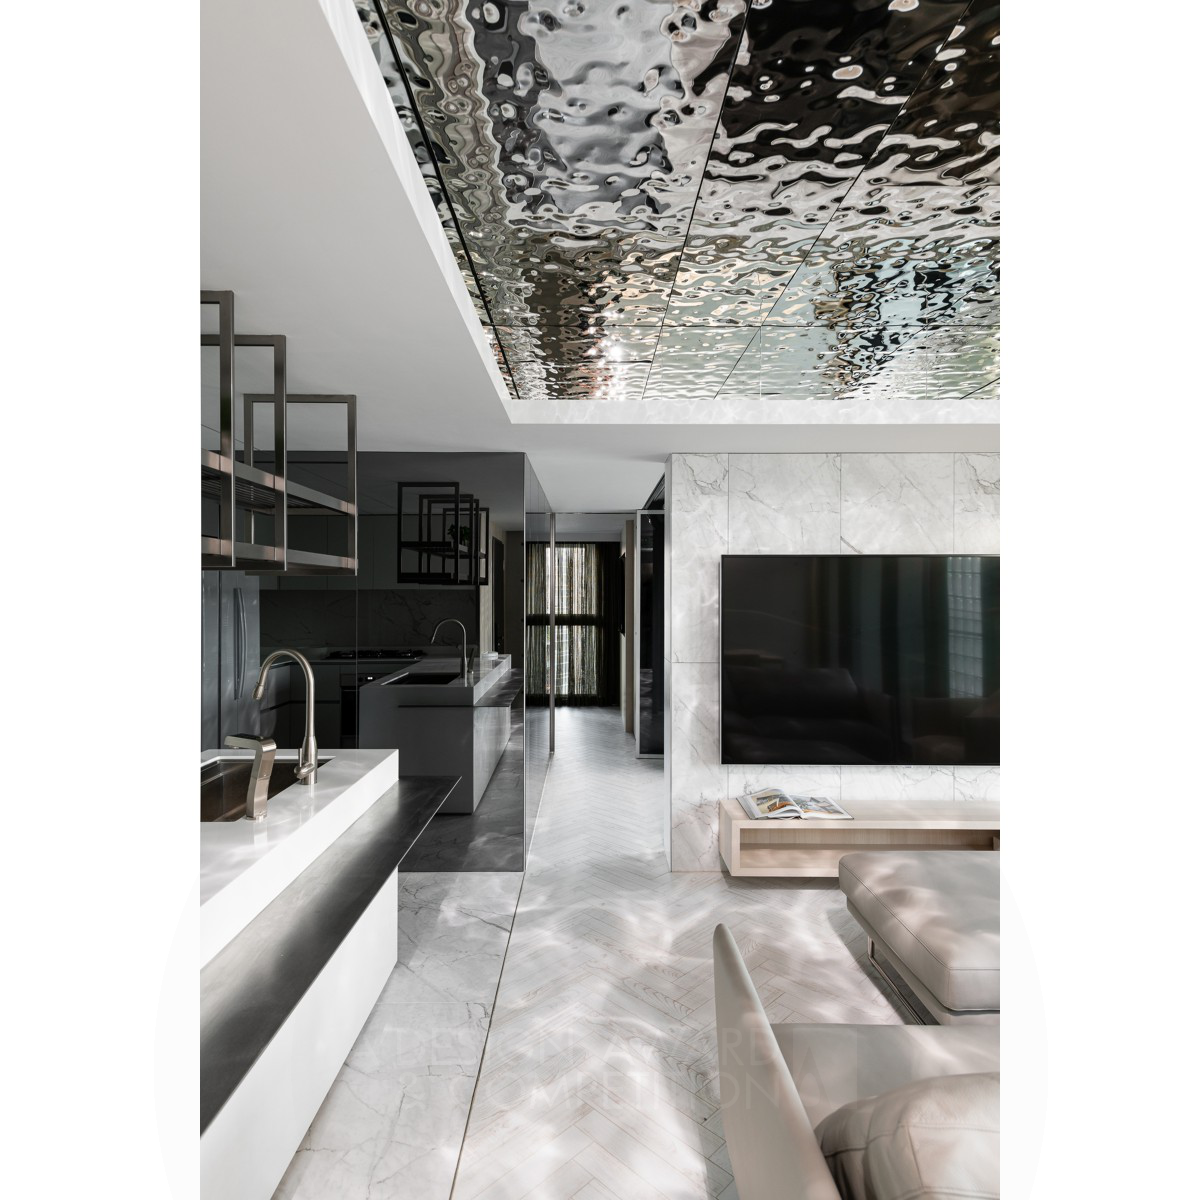 The Mighty River Residential Interior Design by Shih-Yu Chen